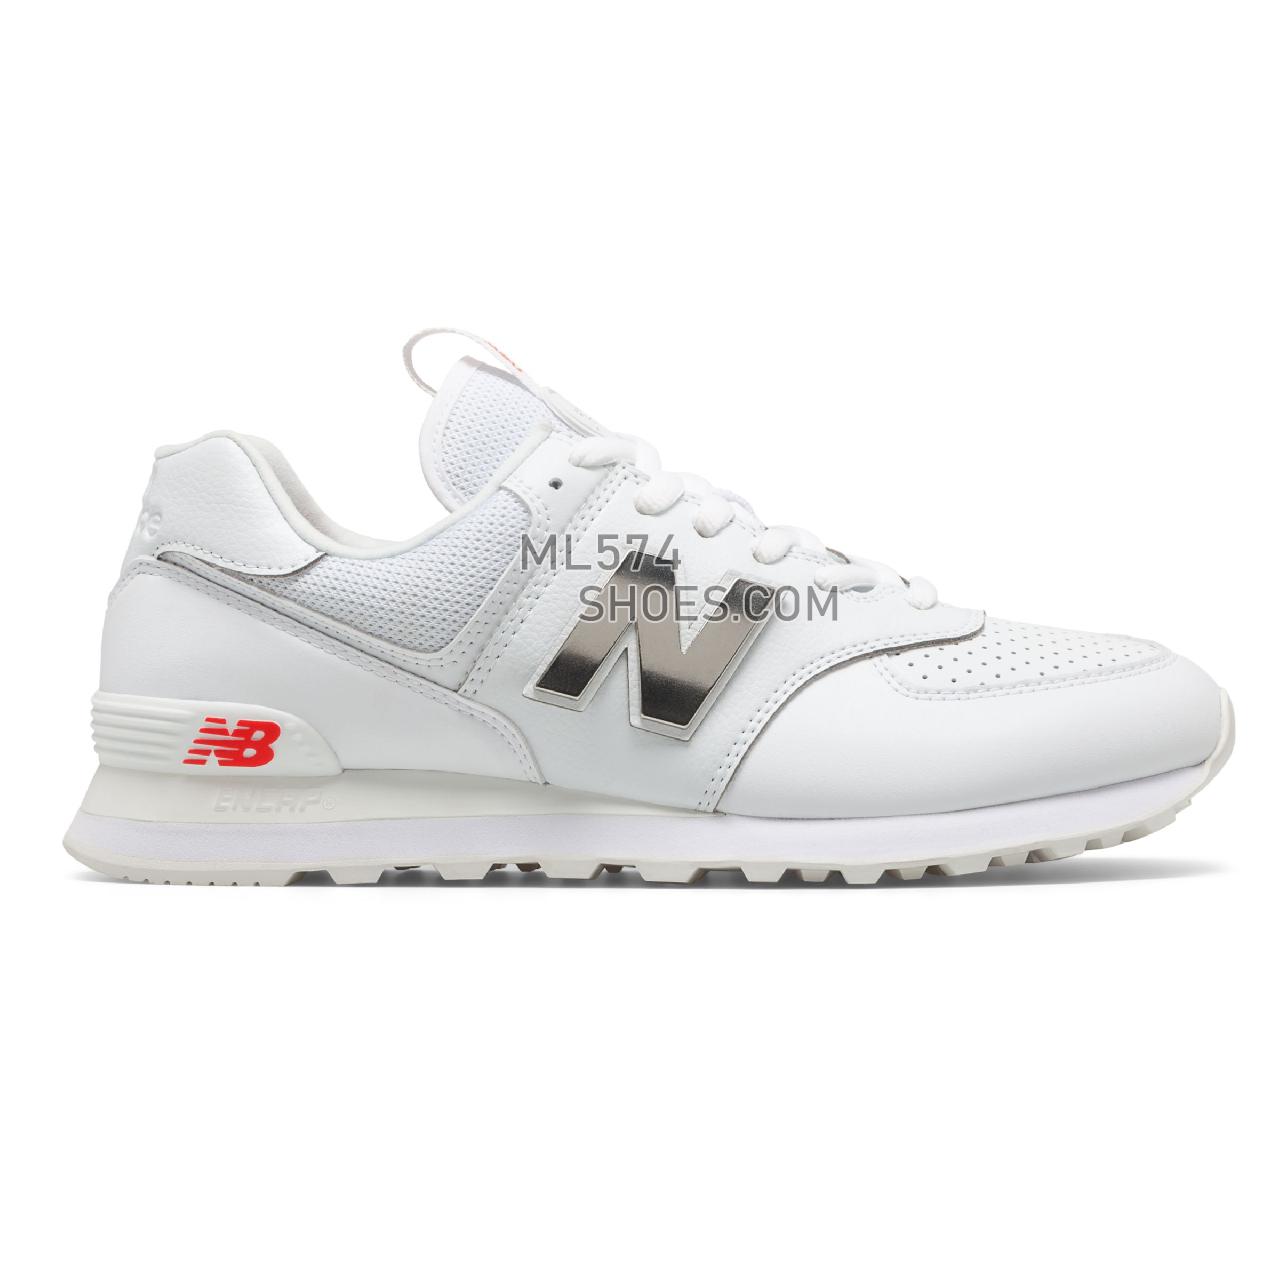 New Balance 574 - Men's Classic Sneakers - White with Neo Flame - ML574SOX